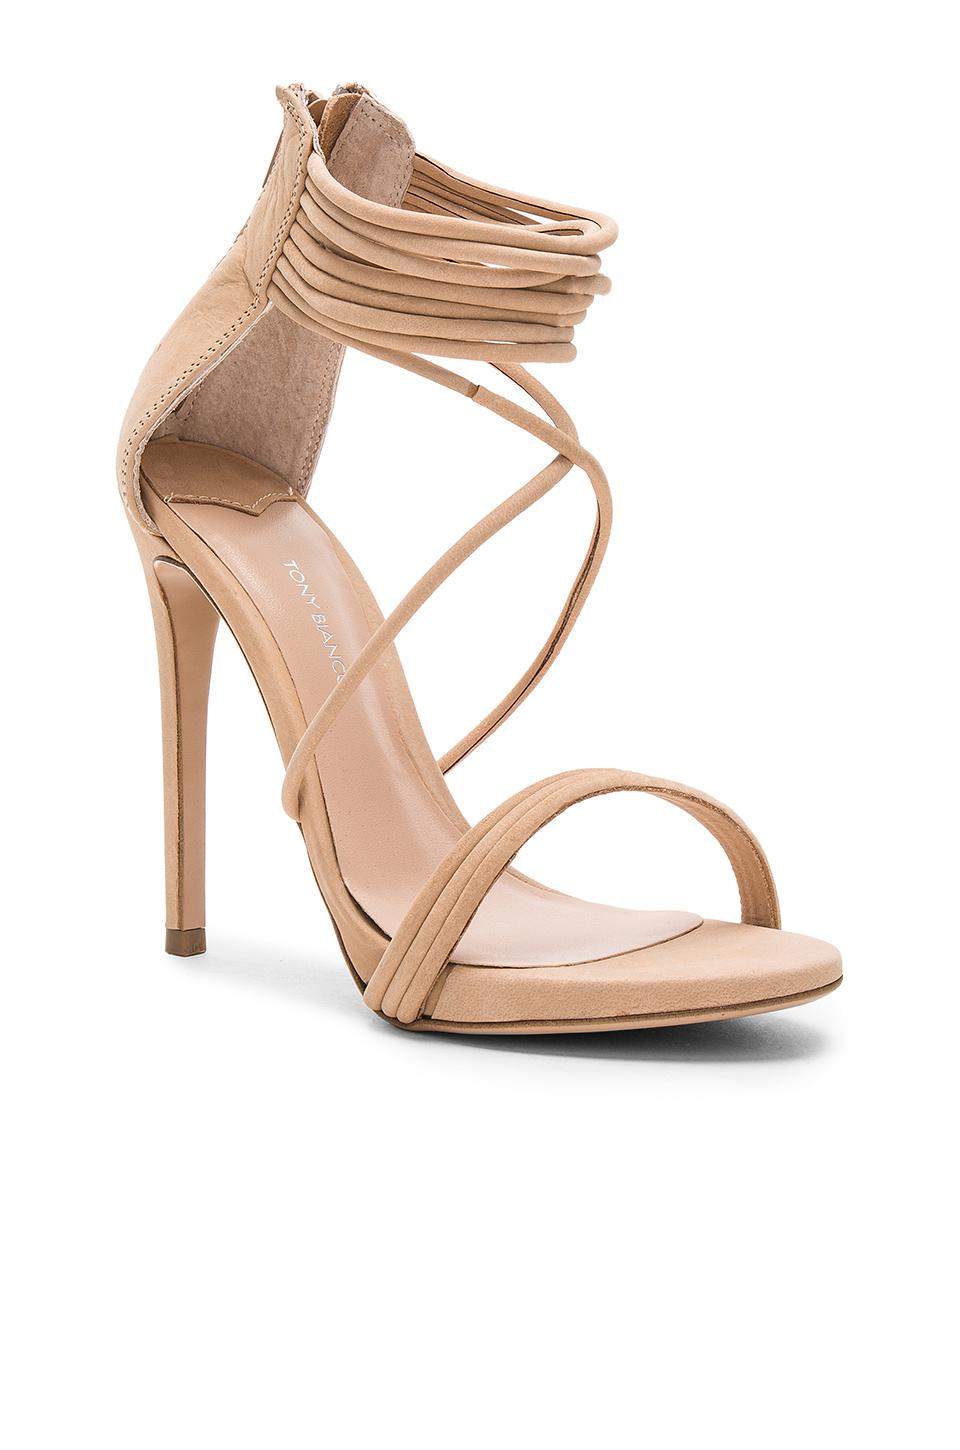 Tony Bianco Leather Alani Heel in Natural - Lyst